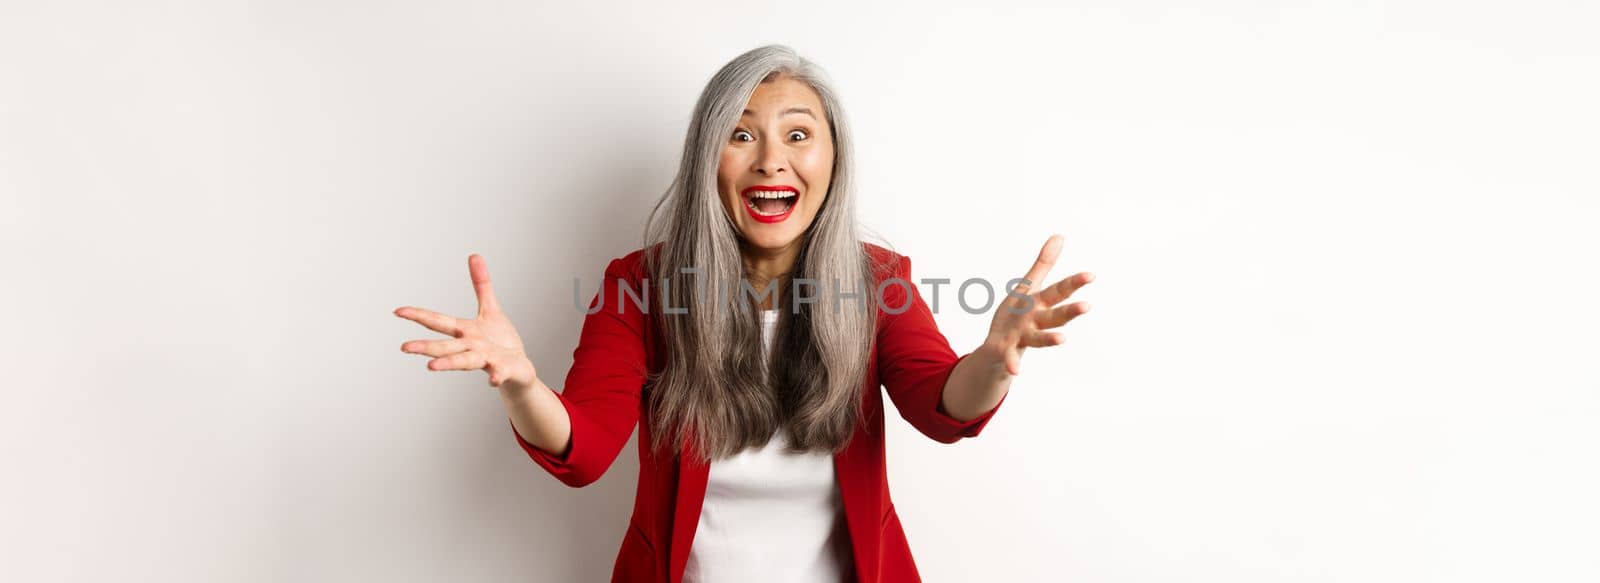 Surprised and friendly asian woman reaching hands forward and smiling, welcoming you, greeting someone, standing over white background.